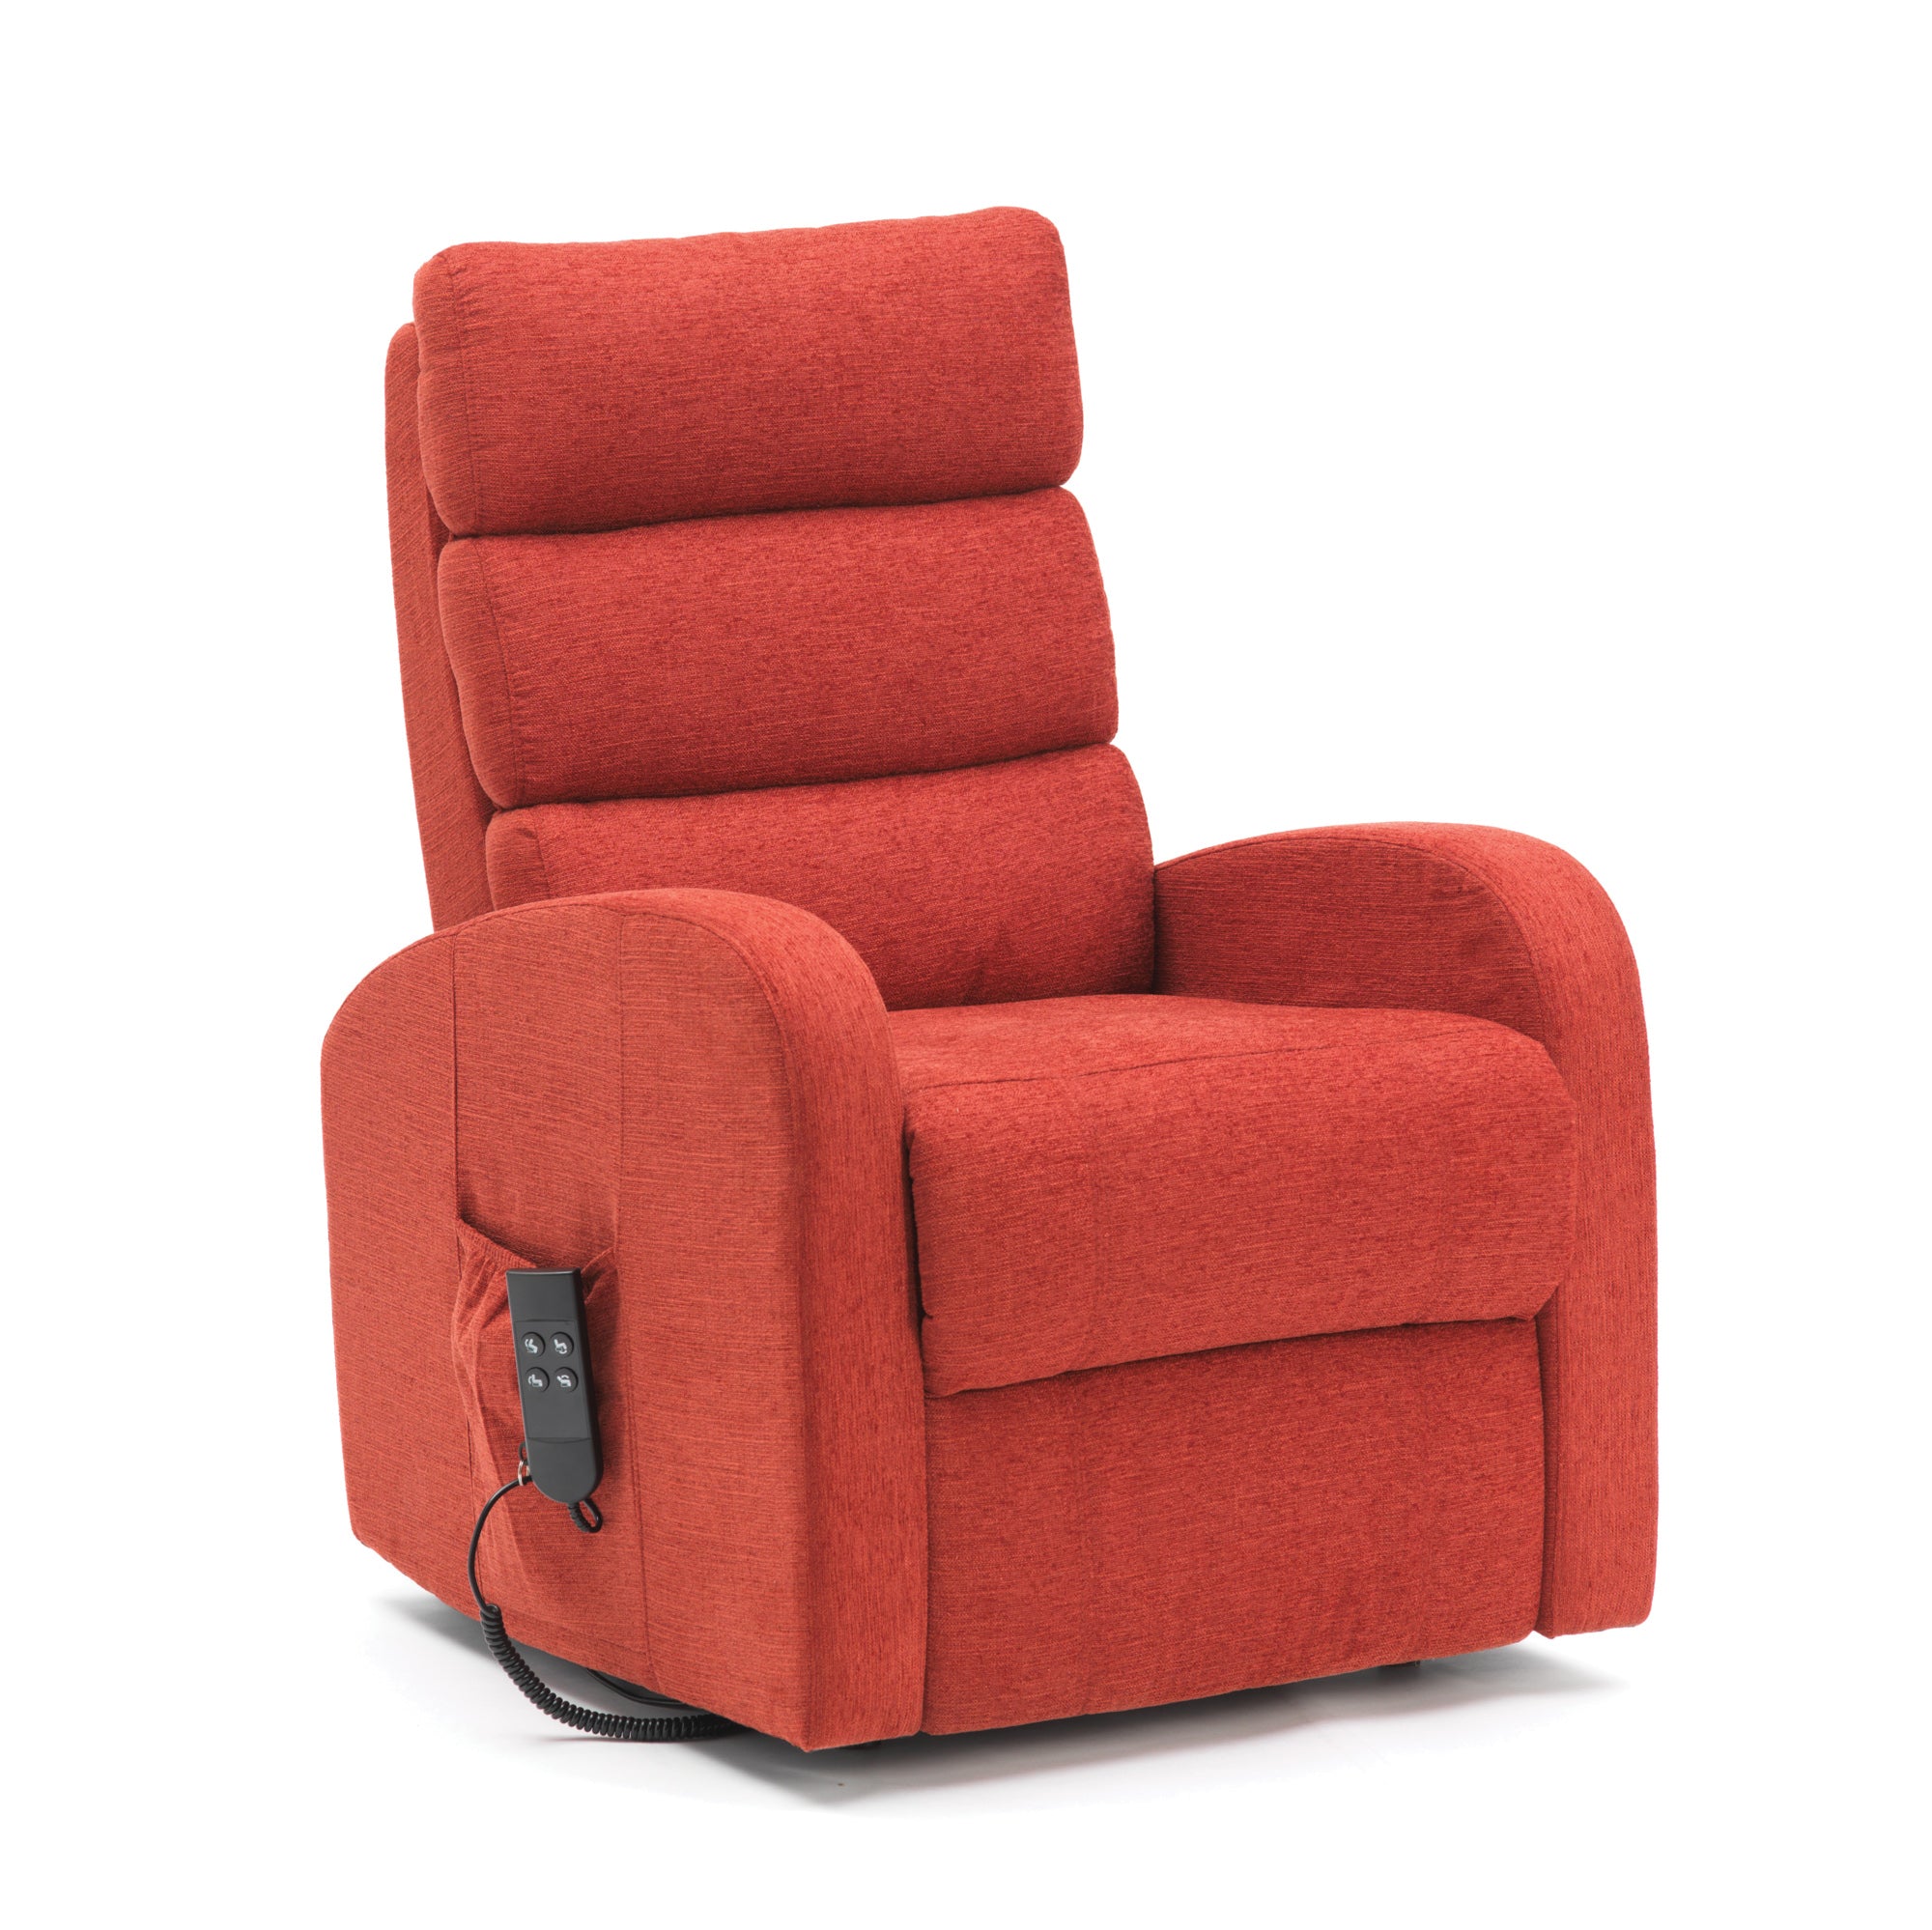 Three Tier Dual Motor Rise & Recliner - Supreme Quality